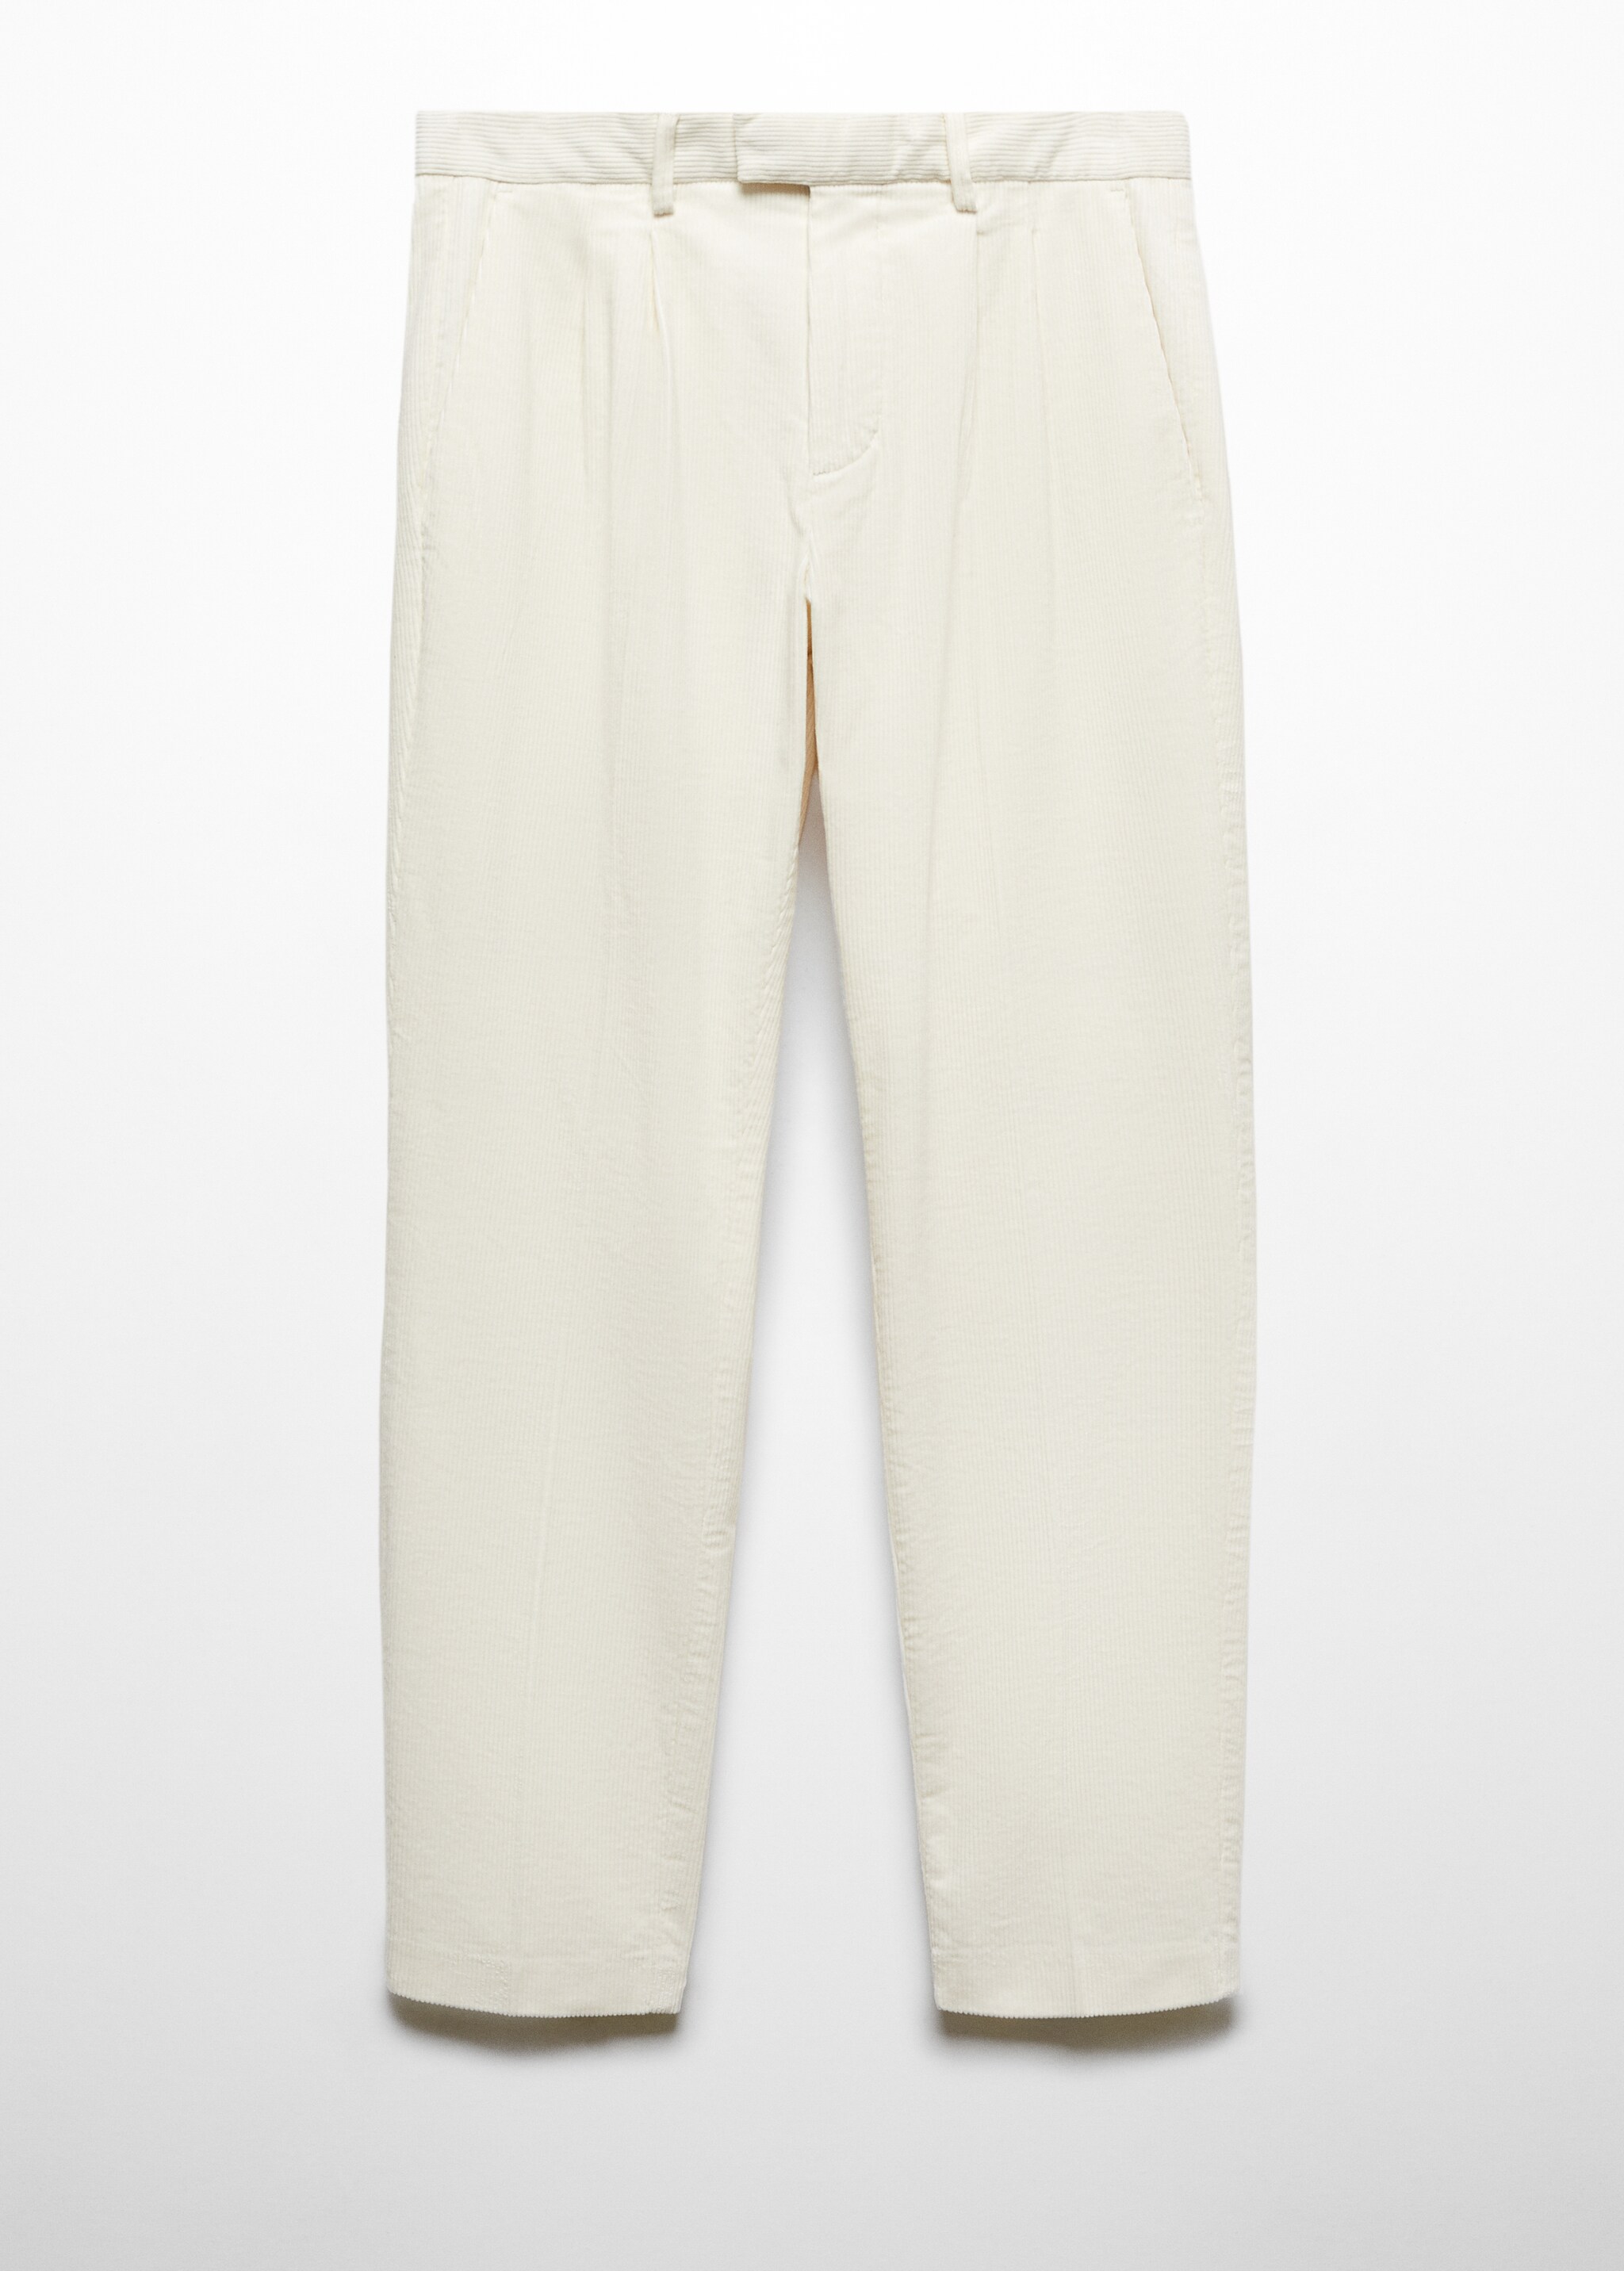 Pleated corduroy trousers - Article without model